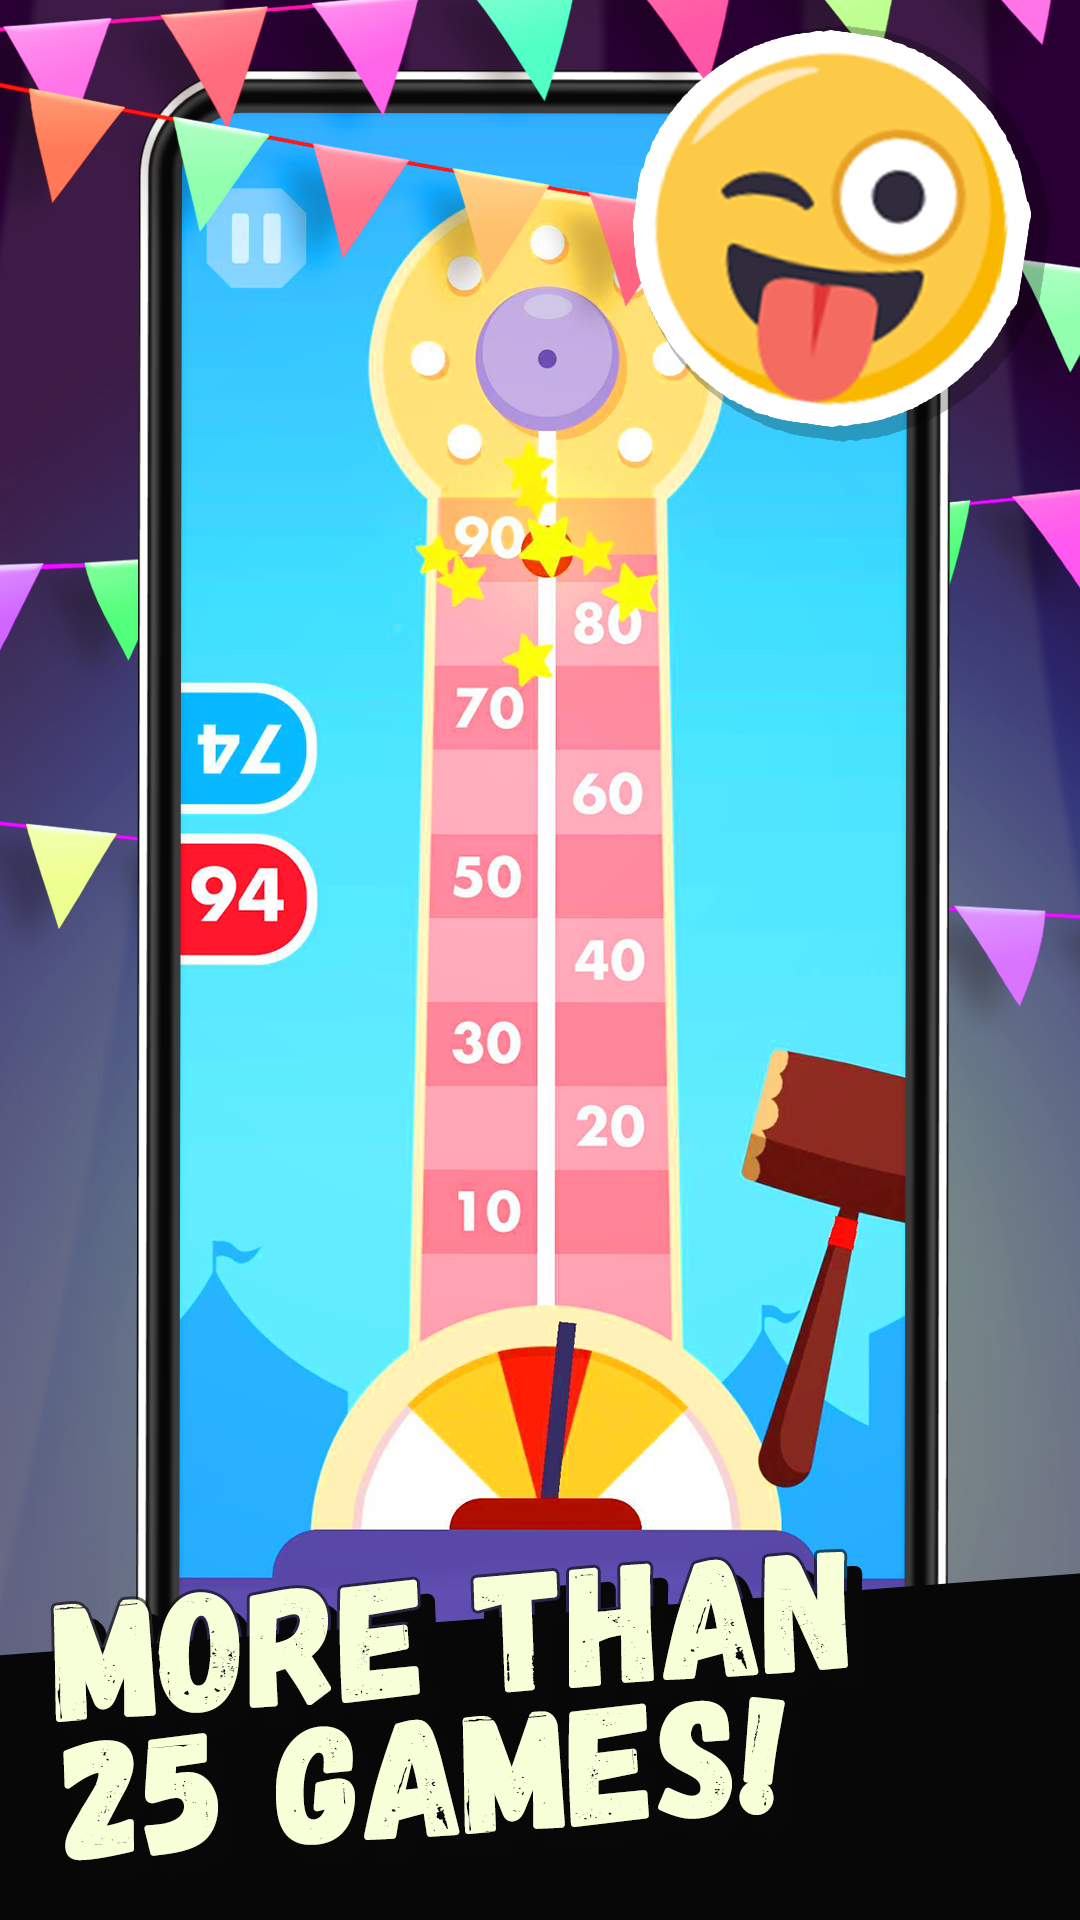 Family-friendly Mobile Games for Two - UNO!™ - 2 Player games : the  Challenge - Golf Battle - TapTap